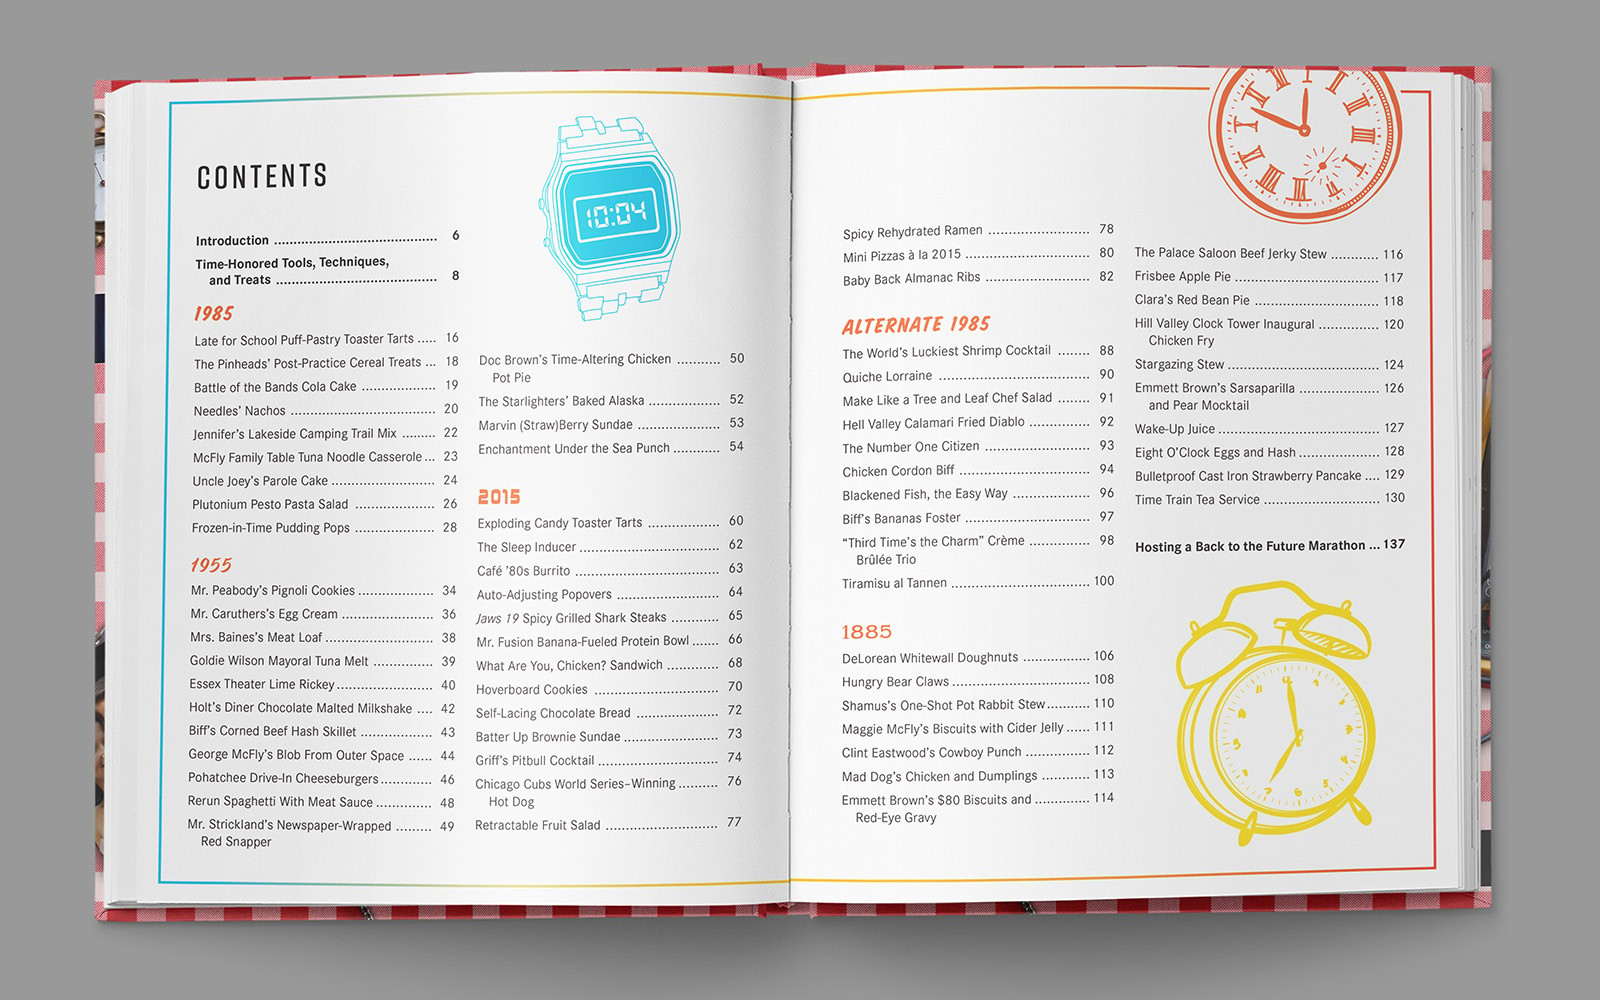 Back to the Future: The Official Hill Valley Cookbook (Prototype Shown) View 3